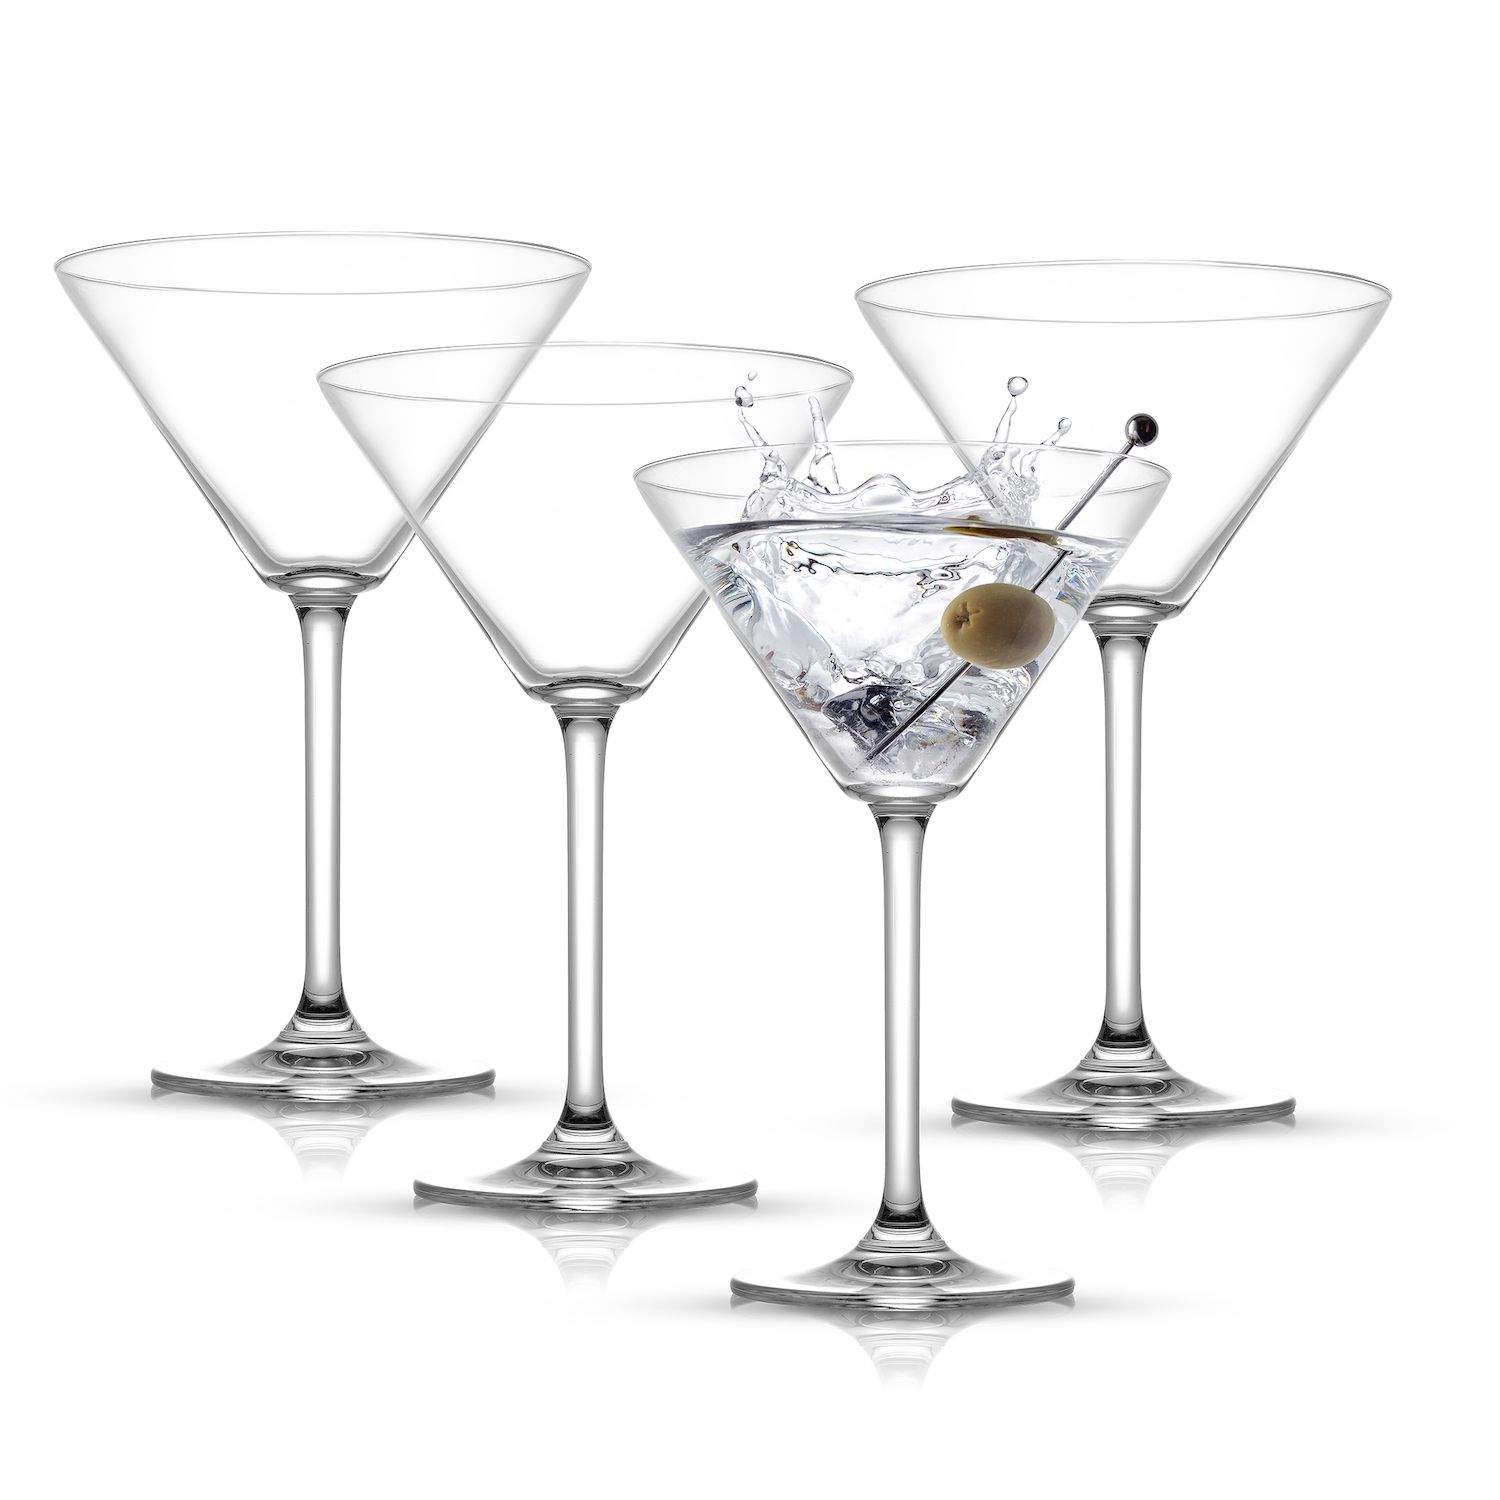 SNOWFOX Shimmer Collection Insulated Stainless Steel Martini and Margarita  Cocktail Glass, Set of 2, Shimmer Grey